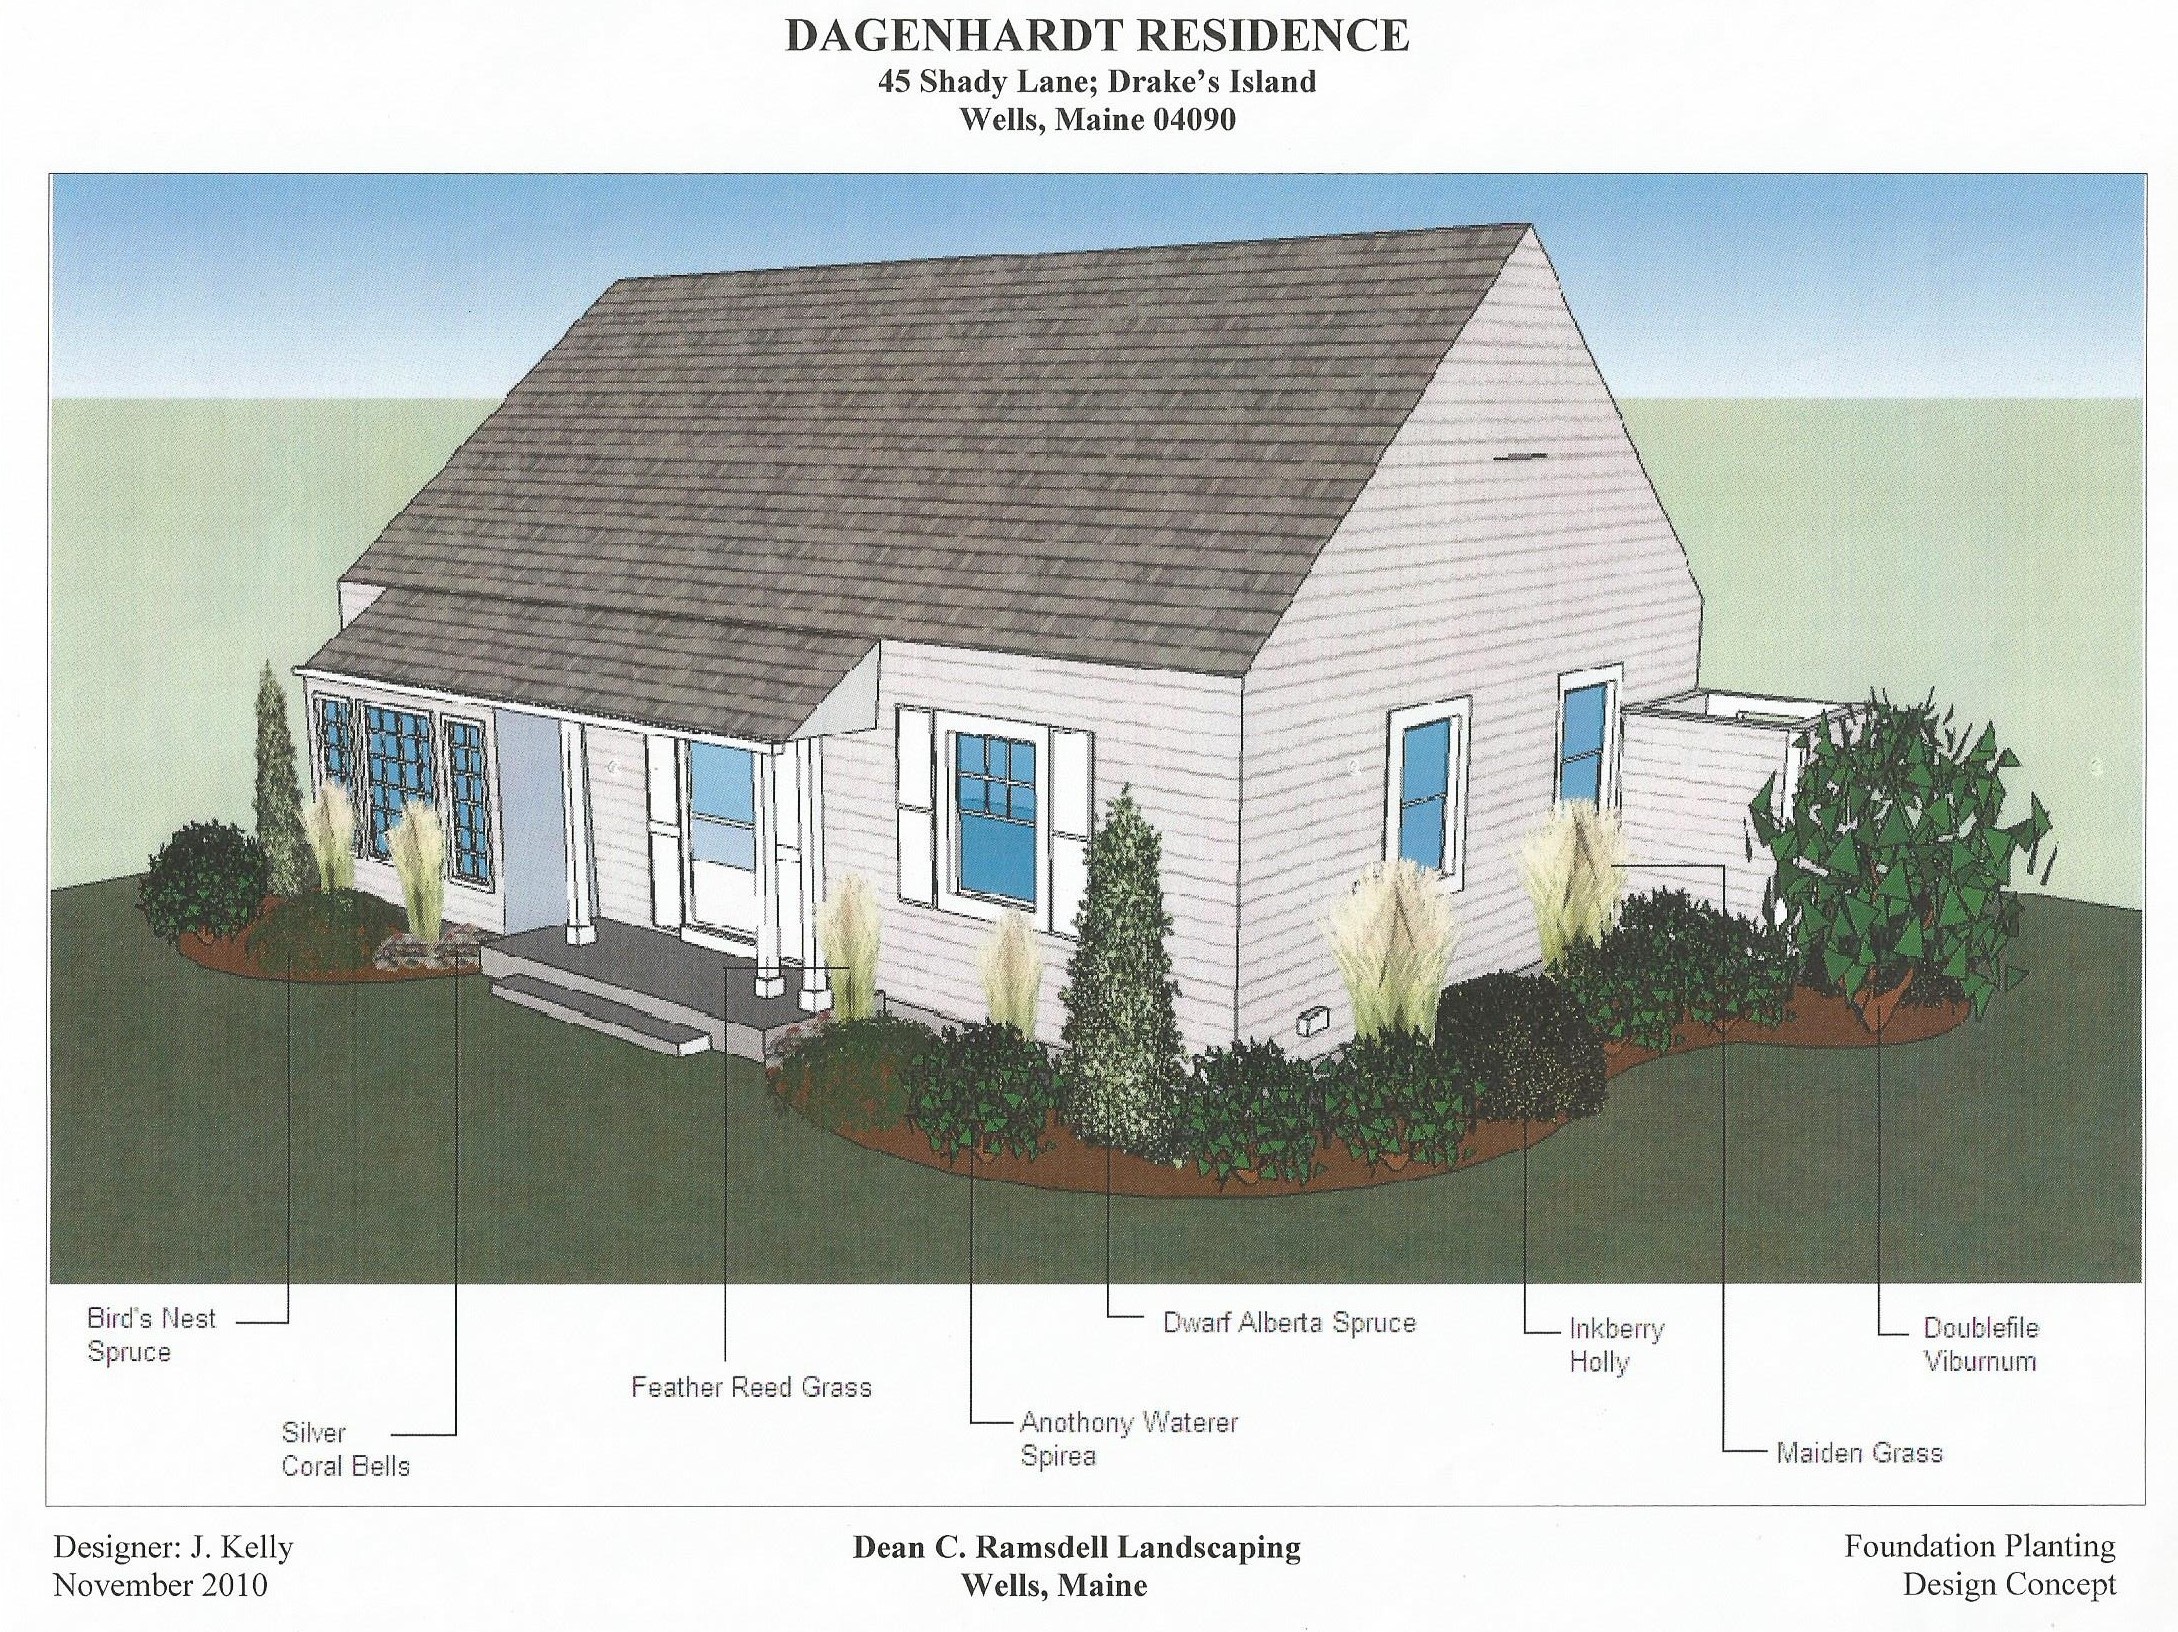 Design Plans Jamie Kelly, Ramsdell Landscaping Wells Maine